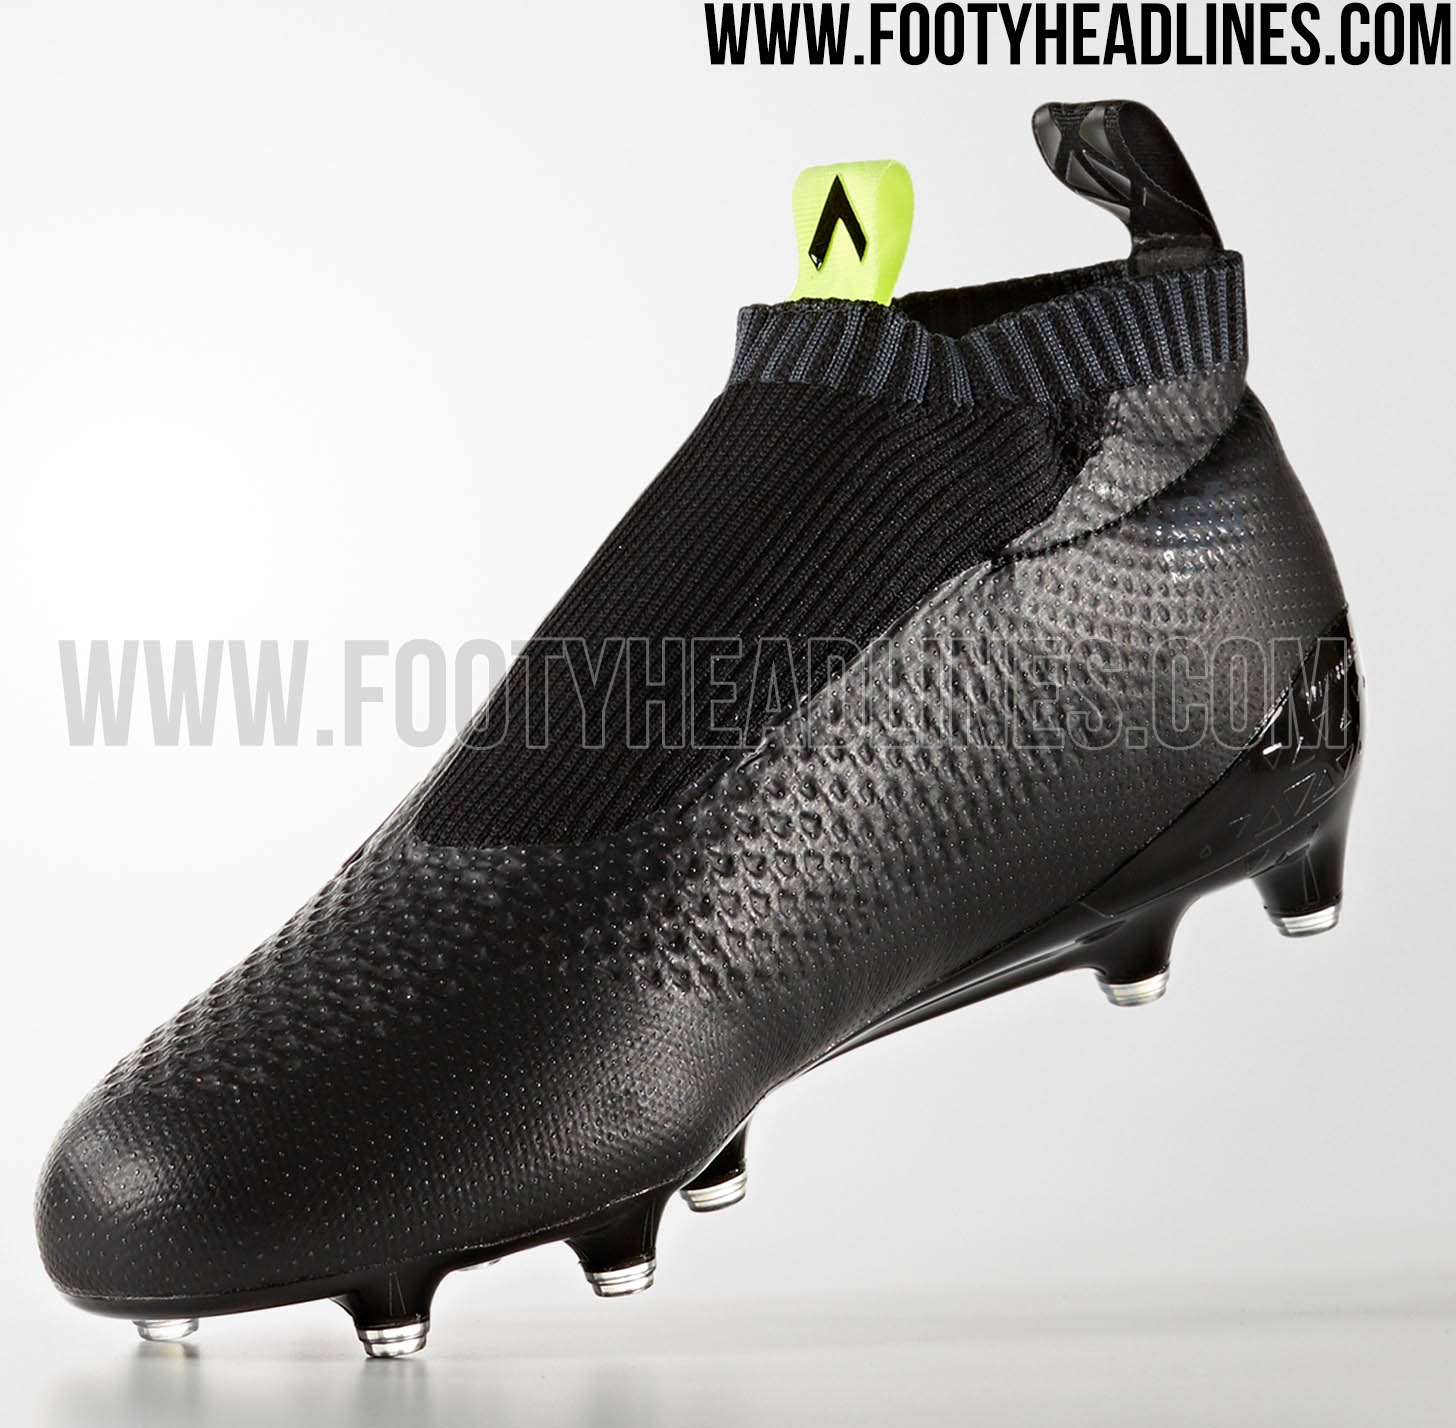 Blackout 16+ PureControl Dark Pack 2016-17 Boots Released - Footy